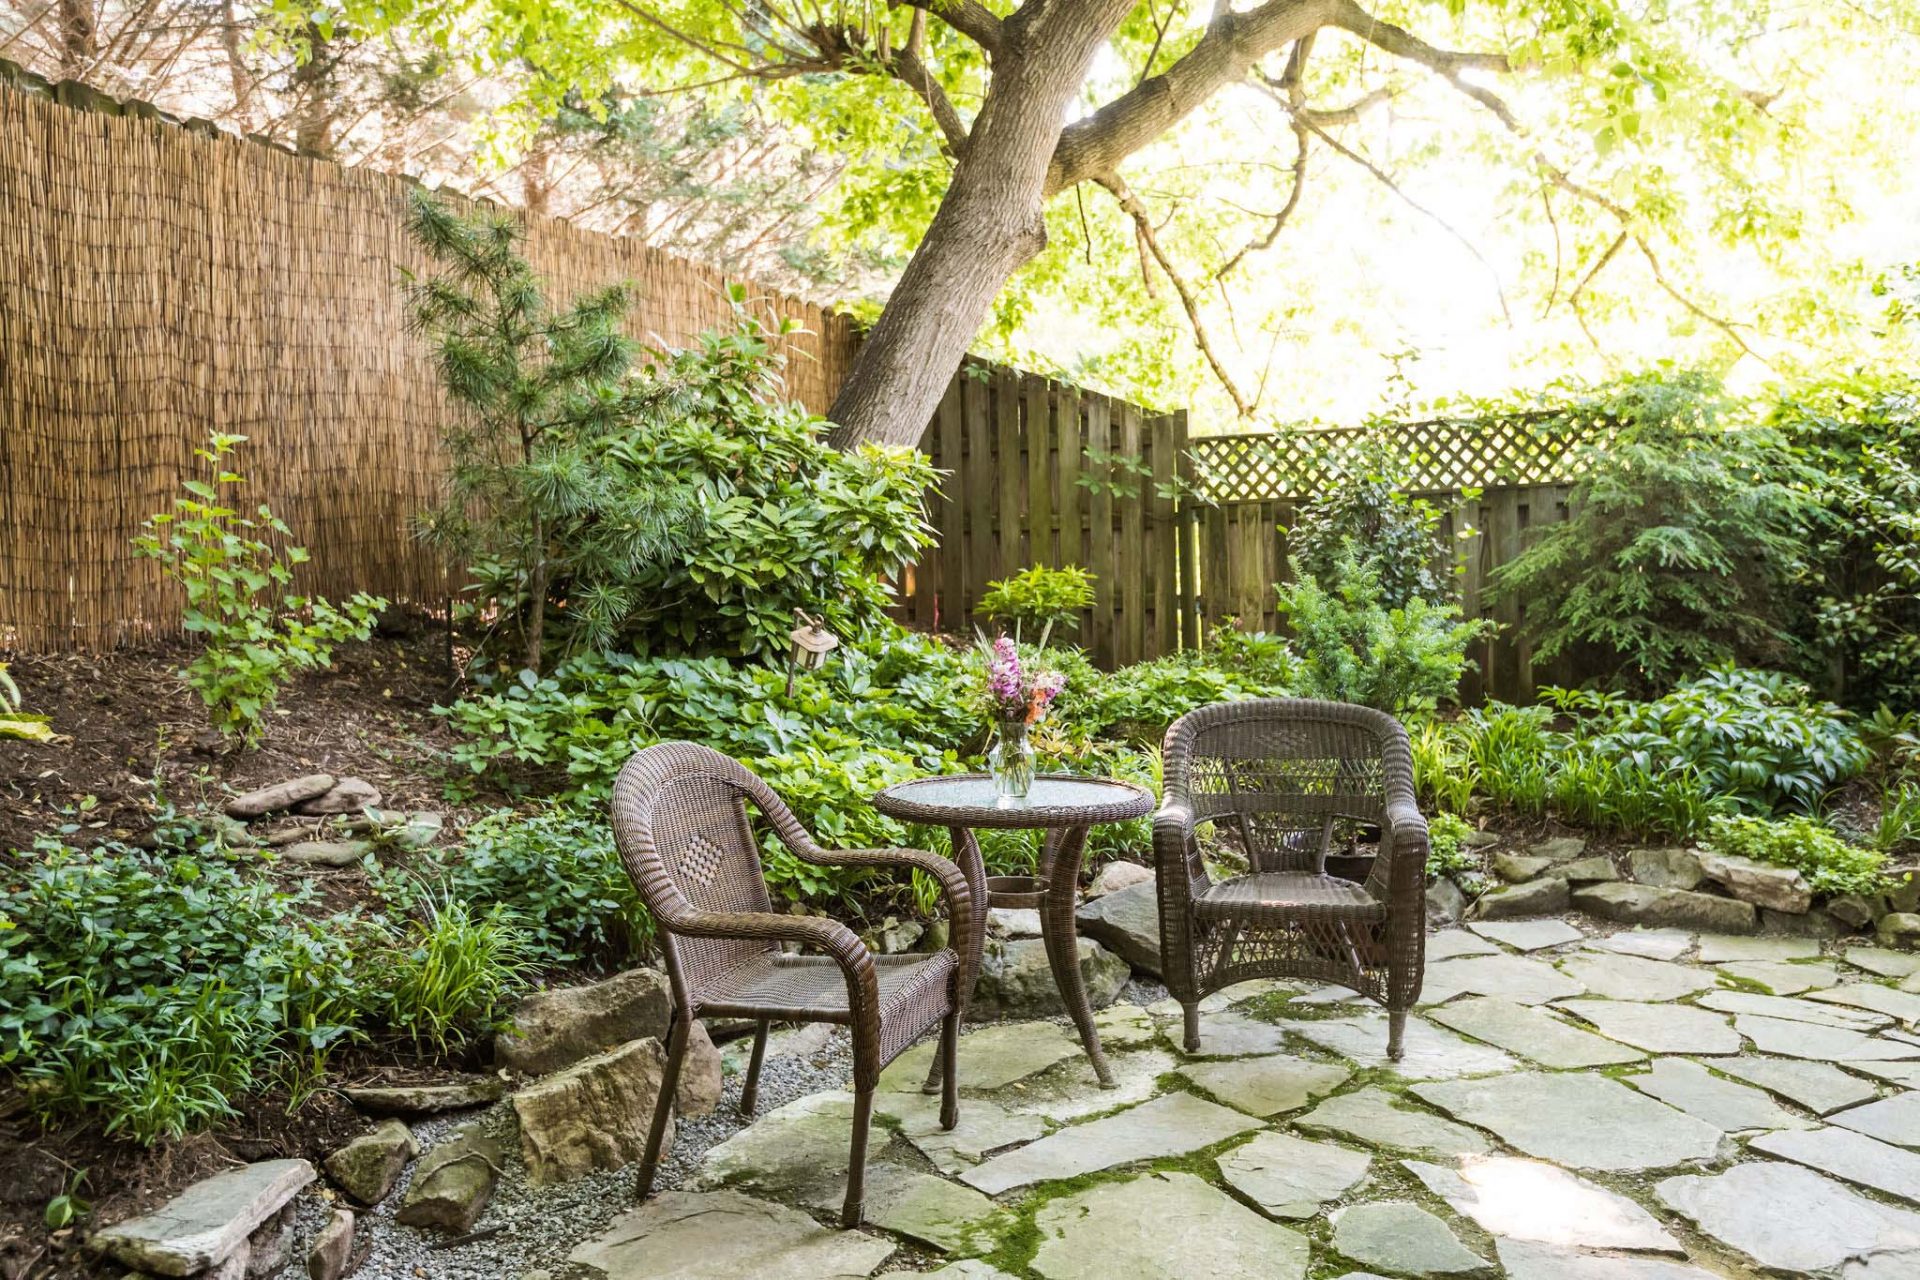 An enclosed rear garden with two rattan airmchairs and a glass table.